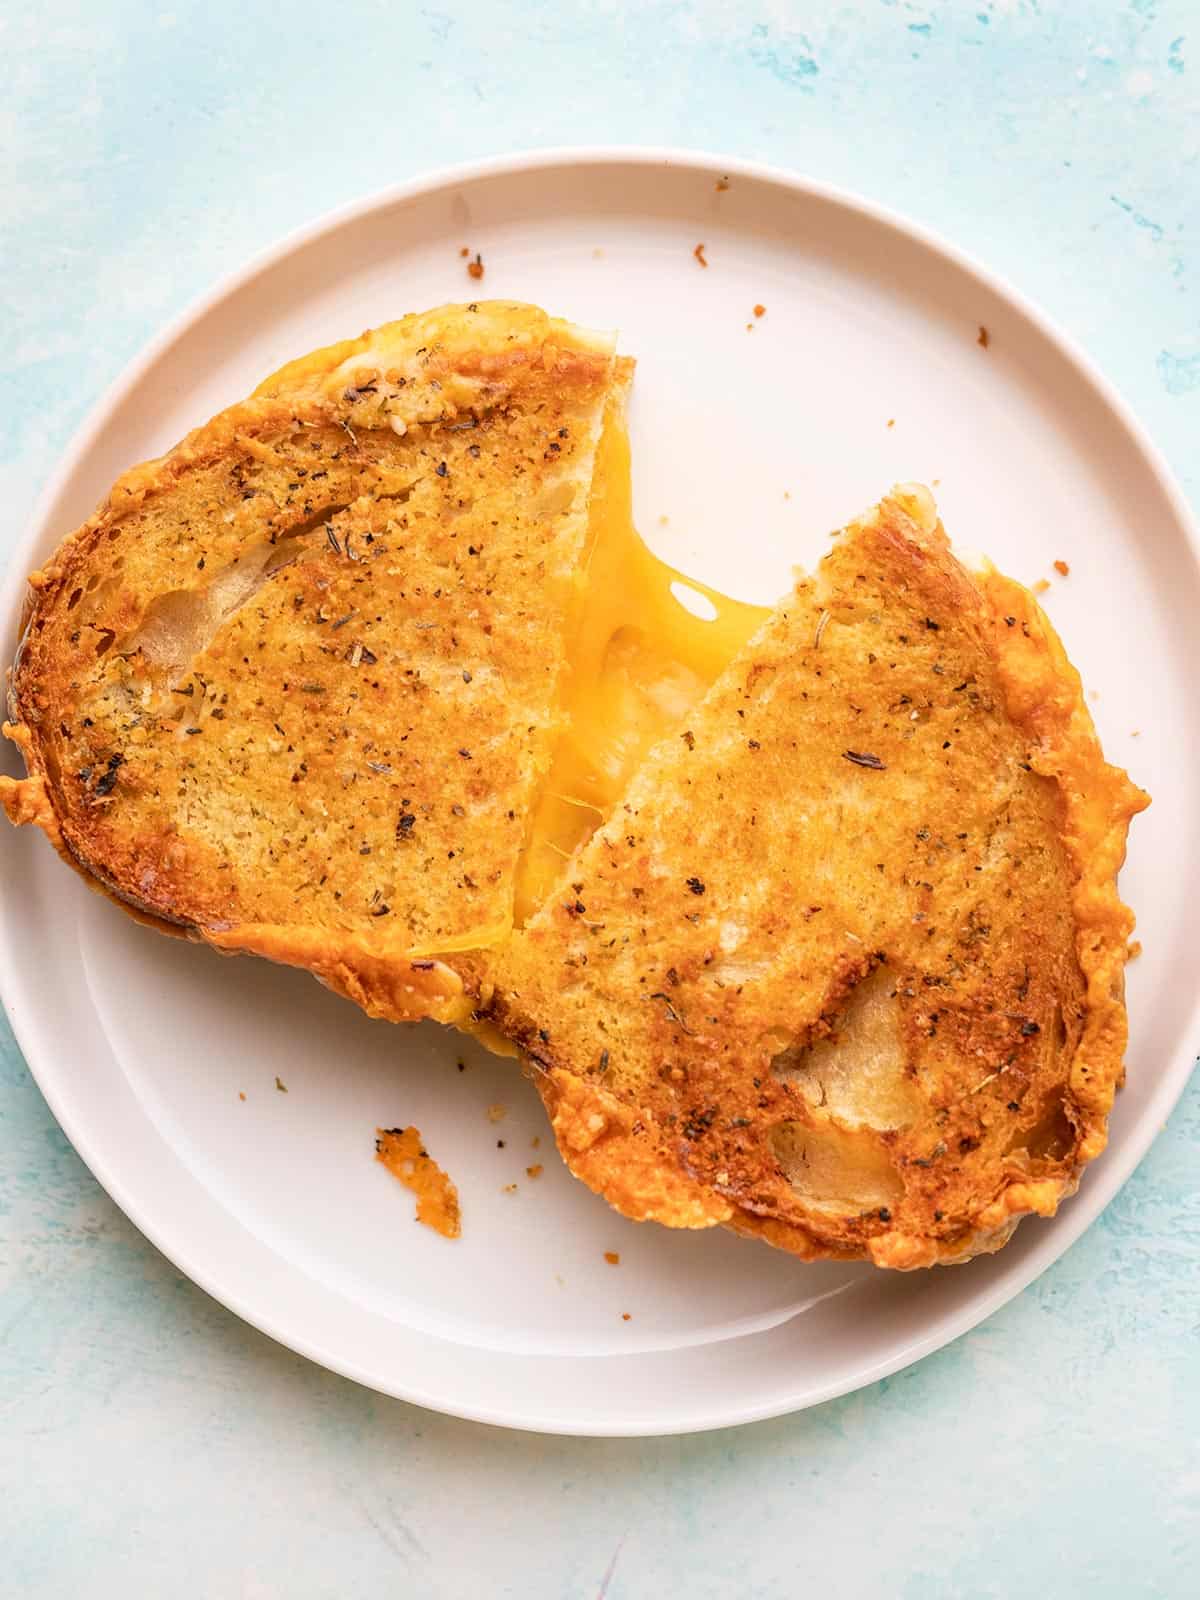 Air fryer grilled cheese being pulled apart on a white plate.